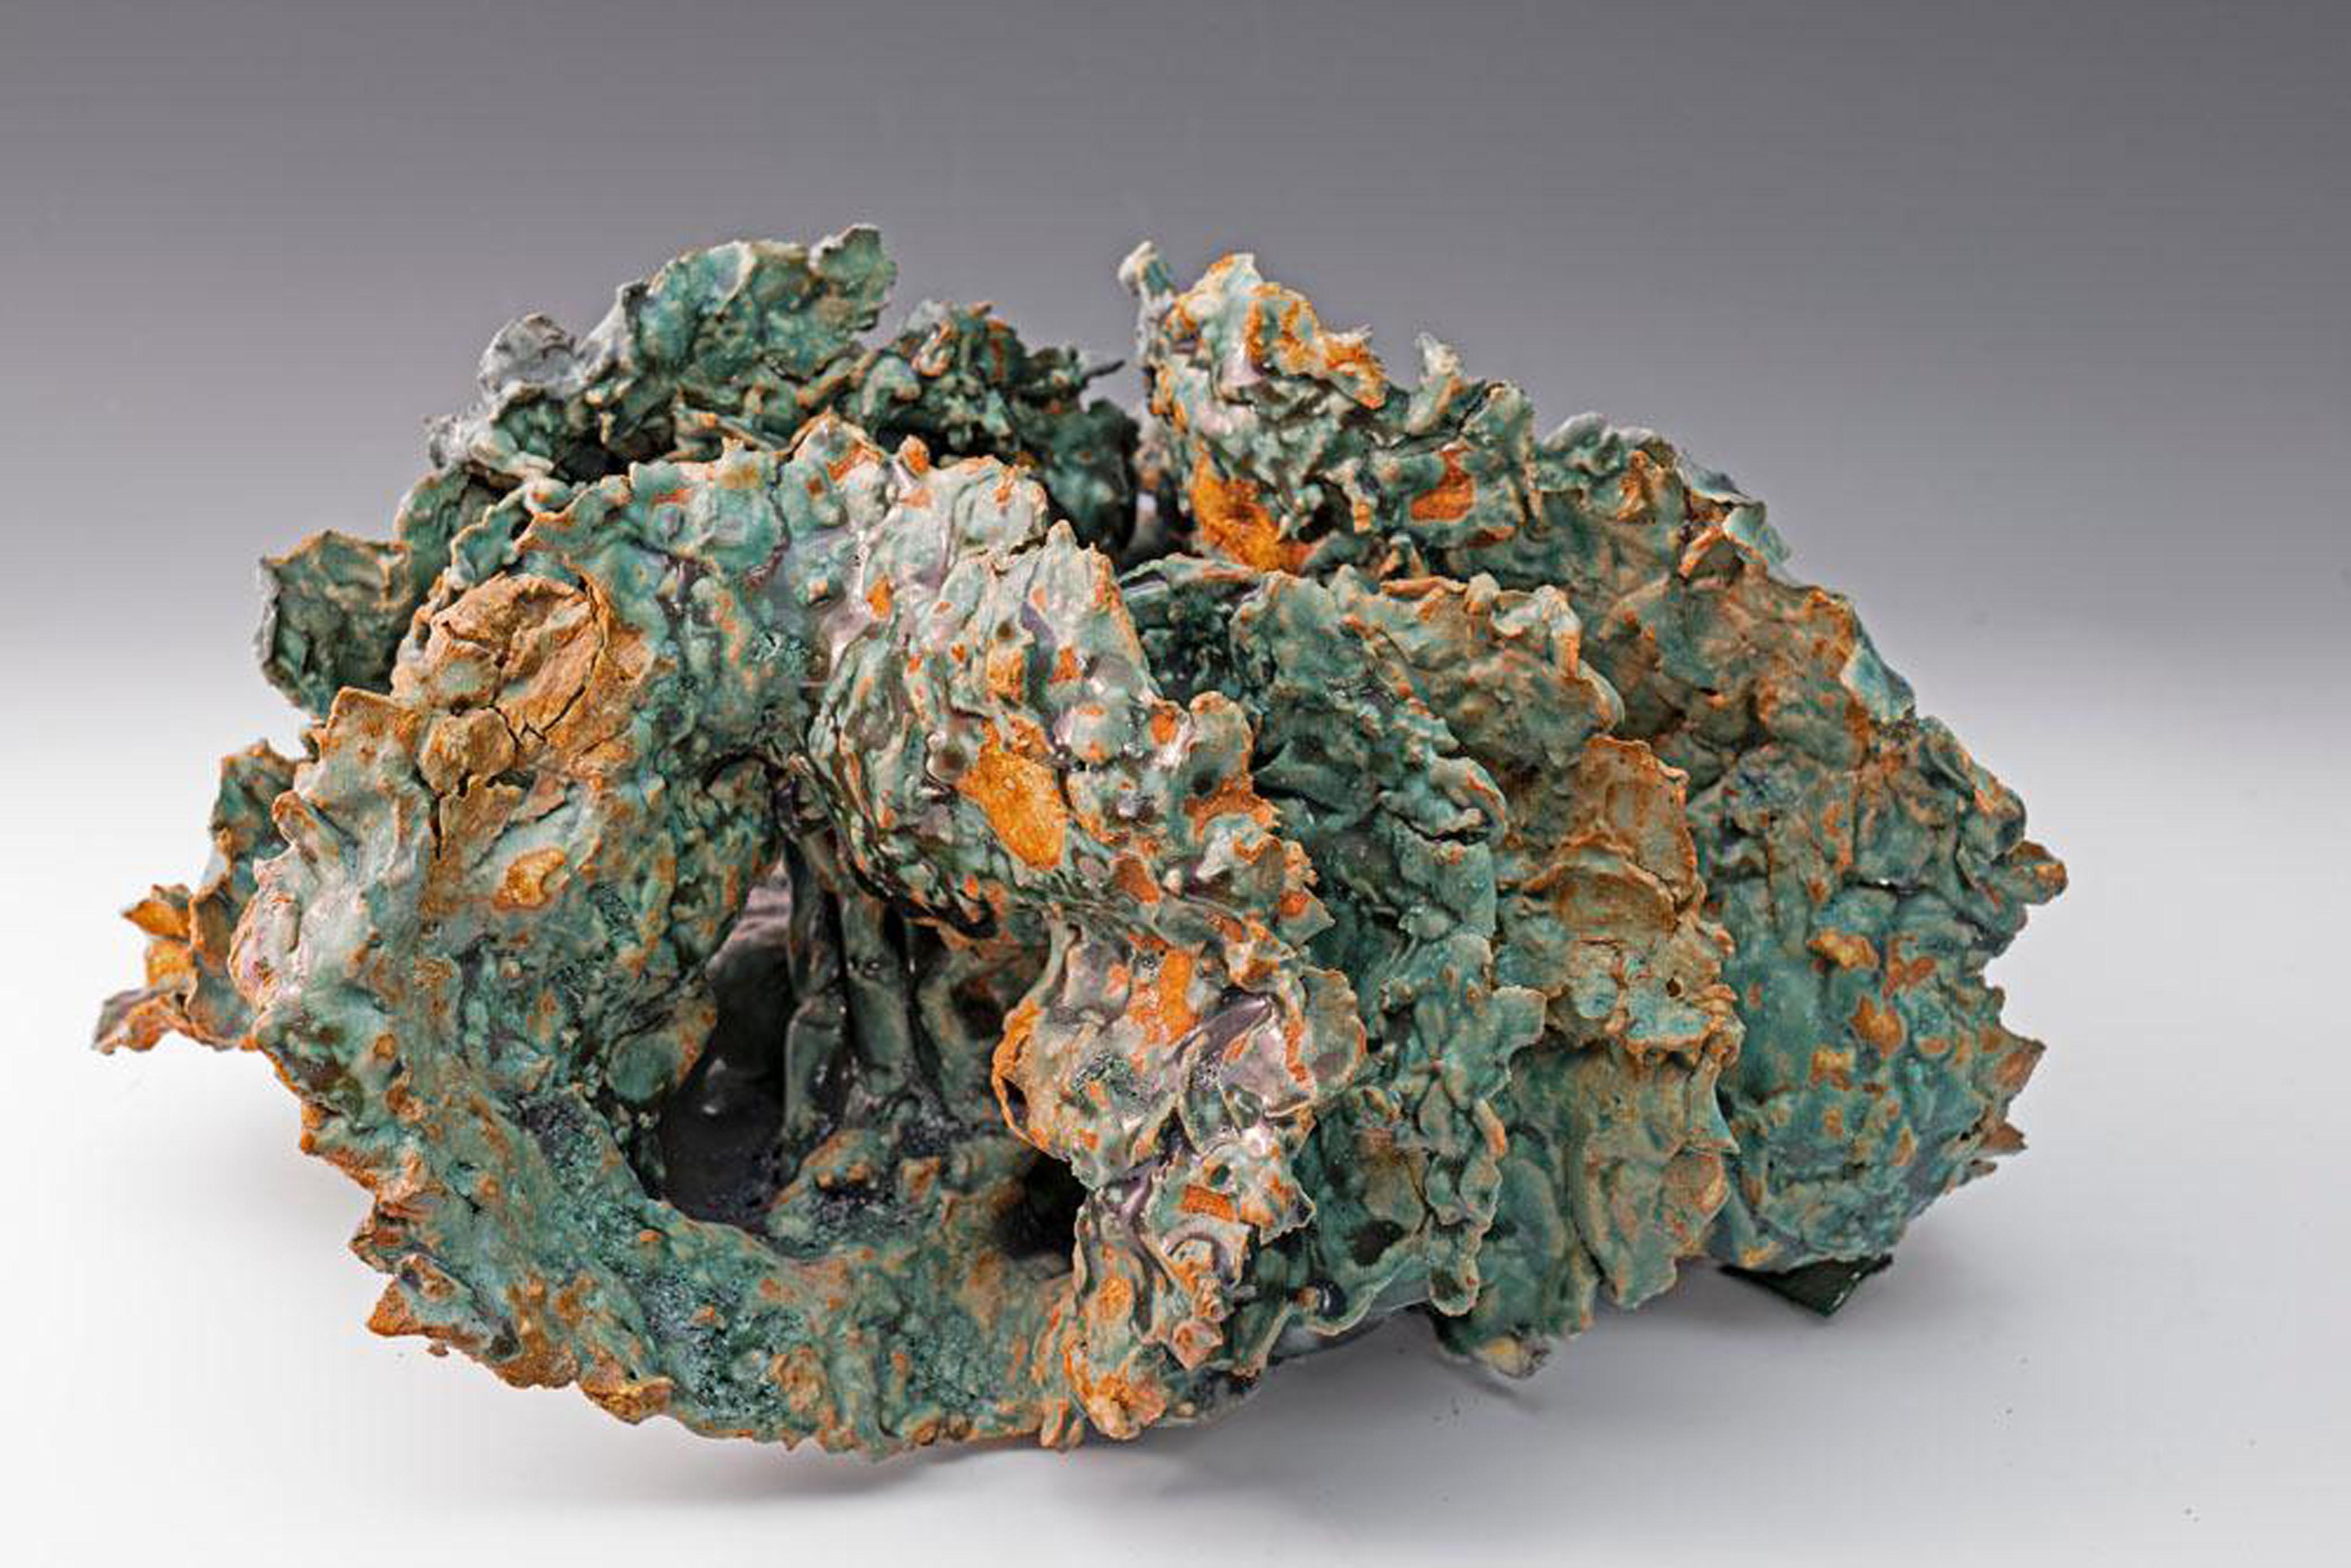 
Sea Creature 2, textured ceramic in blue greens, embodies the essence of clay in its organic shapes that refer directly to the earth and nature. The artist says 